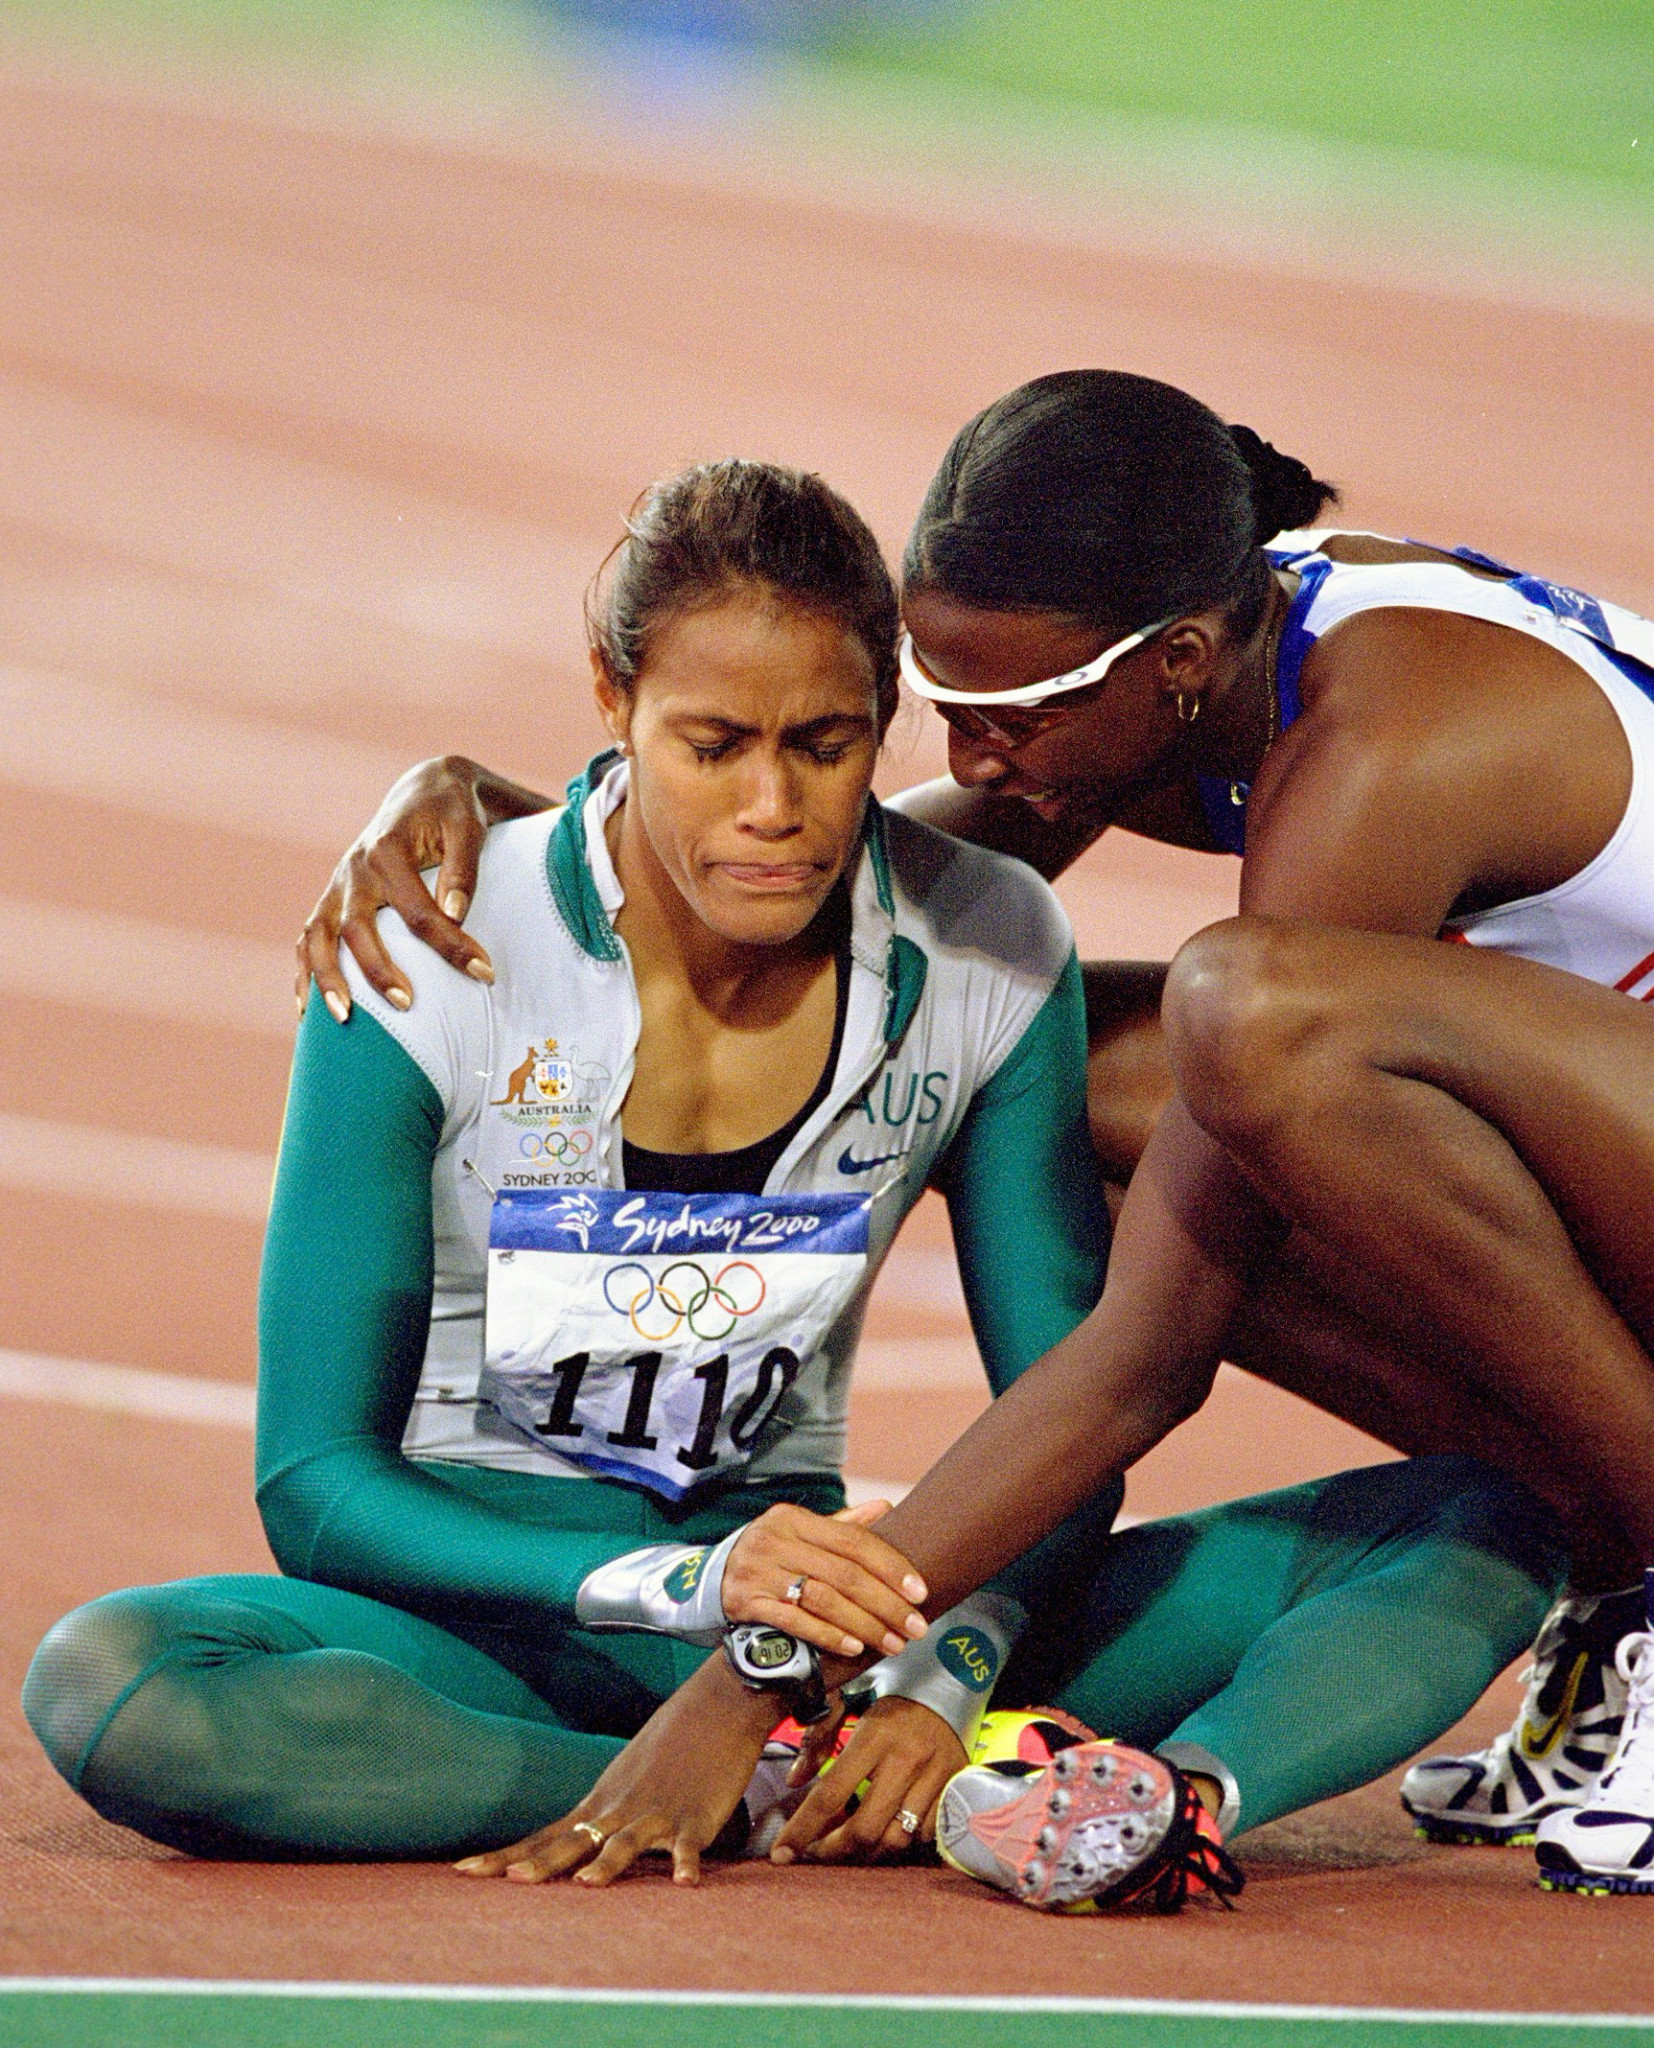 Britain's fourth-placed Donna Fraser was the first to congratulate a stunned Cathy Freeman after she had fulfilled her destiny and won the Olympic 400m gold medal at Sydney 2000 ©Getty Images